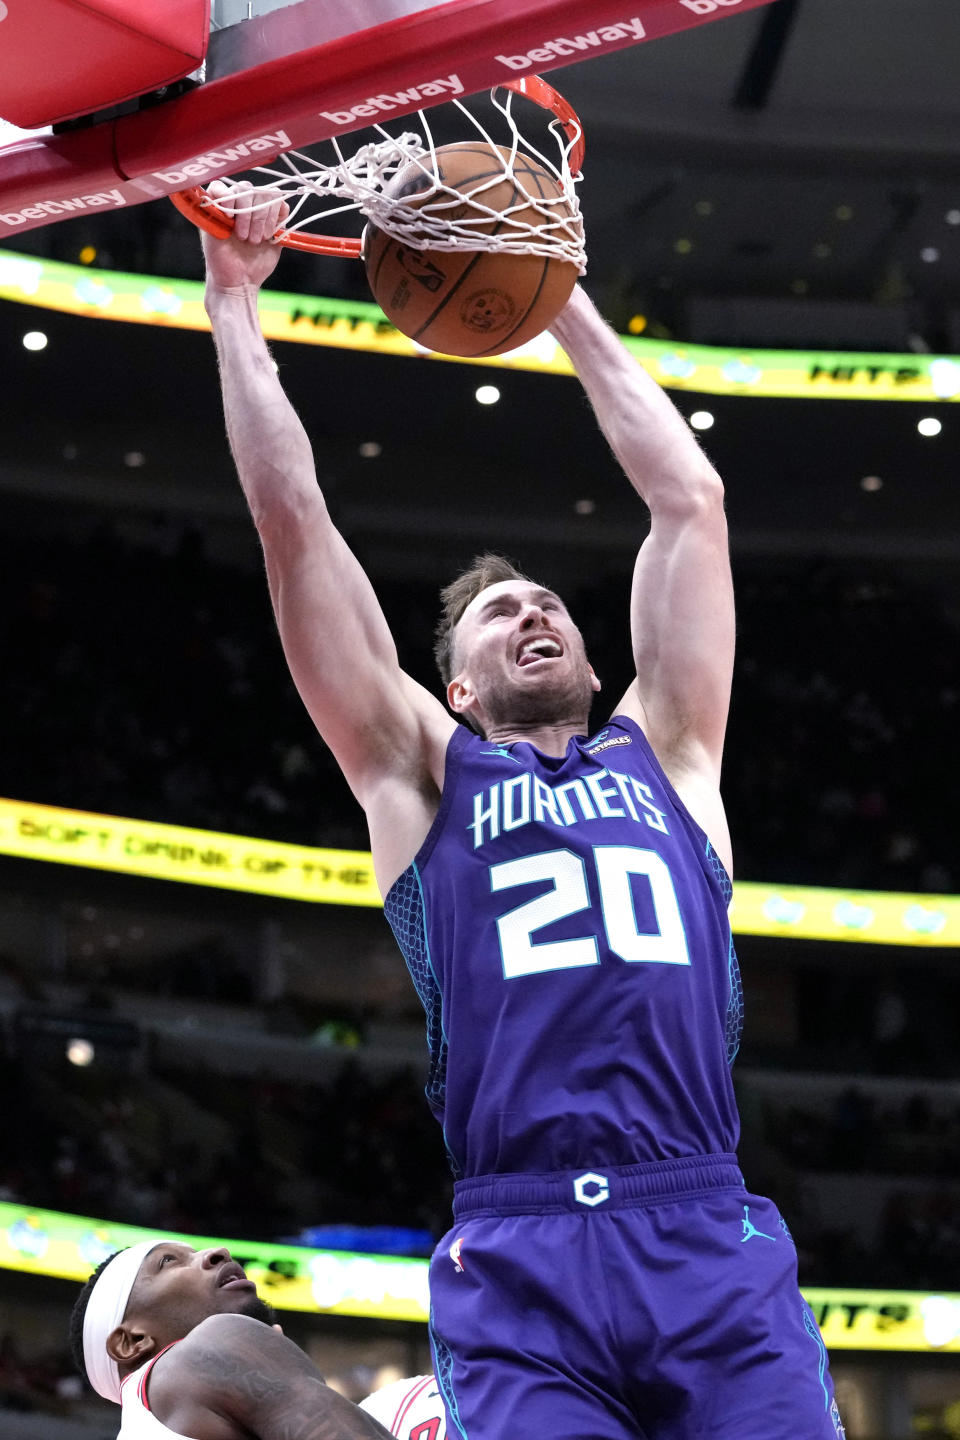 FILE - Charlotte Hornets forward Gordon Hayward dunks against the Chicago Bulls during the second half of an NBA basketball game in Chicago, Wednesday, Dec. 6, 2023. The Charlotte Hornets are sending often-injured small forward Gordon Hayward to the Oklahoma City Thunder in exchange for guard Tre Mann, power forward Davis Bertans, point guard Vasilije Micic and two second round draft picks, according to a person familiar with the situation. The person spoke to The Associated Press on condition of anonymity Thursday, Feb. 8, 2024, because the deal has not yet been approved by the league.(AP Photo/Nam Y. Huh, File)